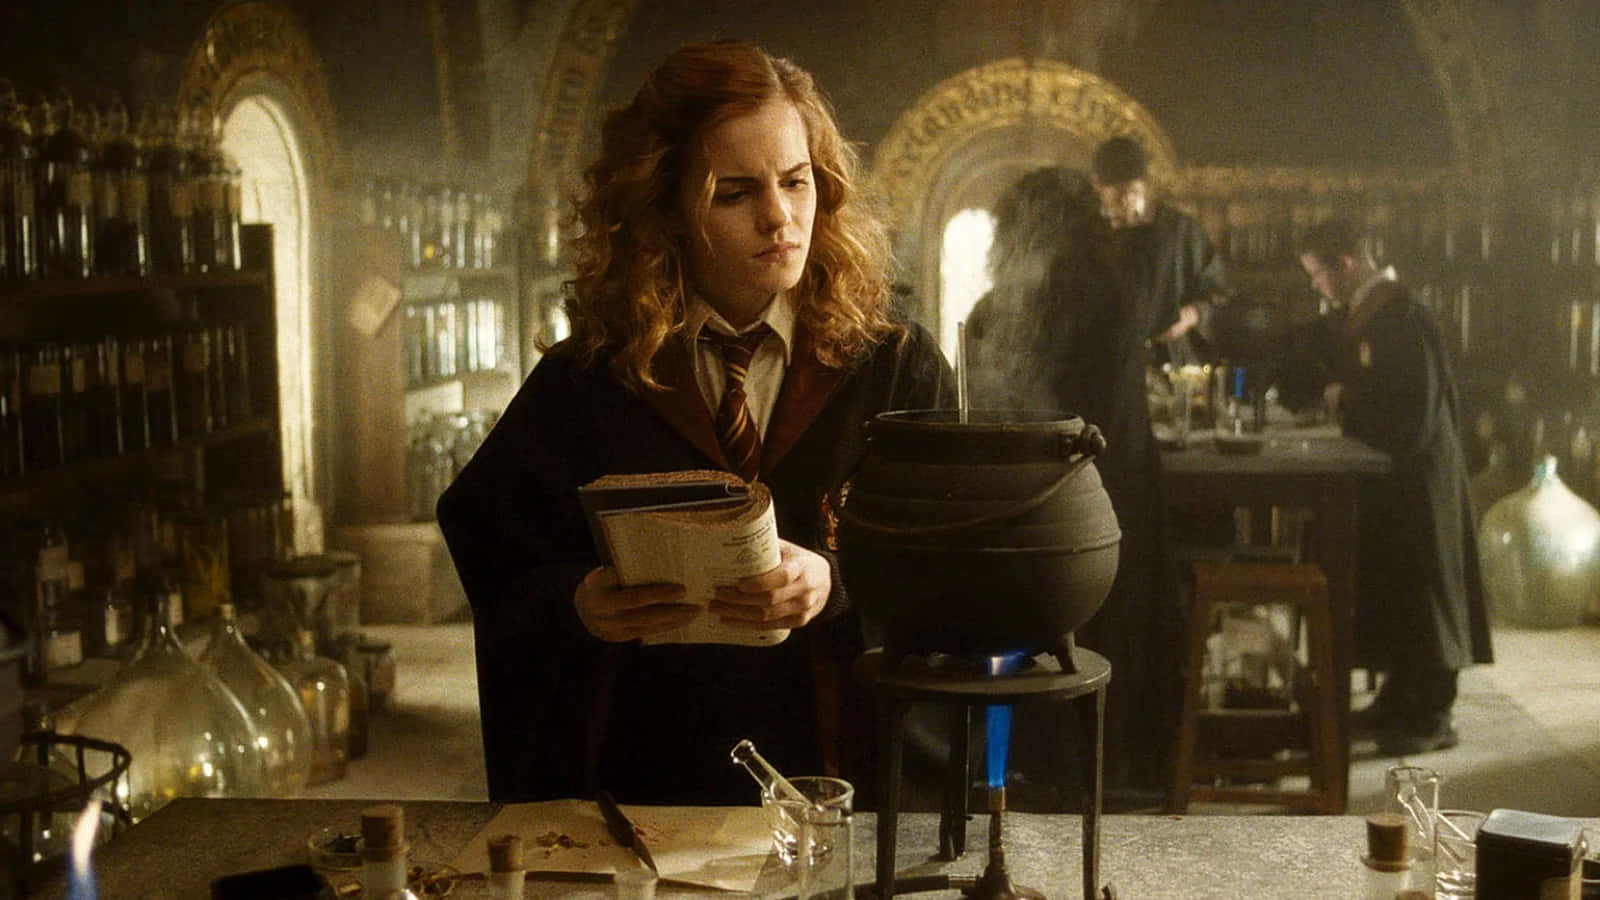 Brewing up Magical Potions at the Hogwarts Potions Class" Wallpaper